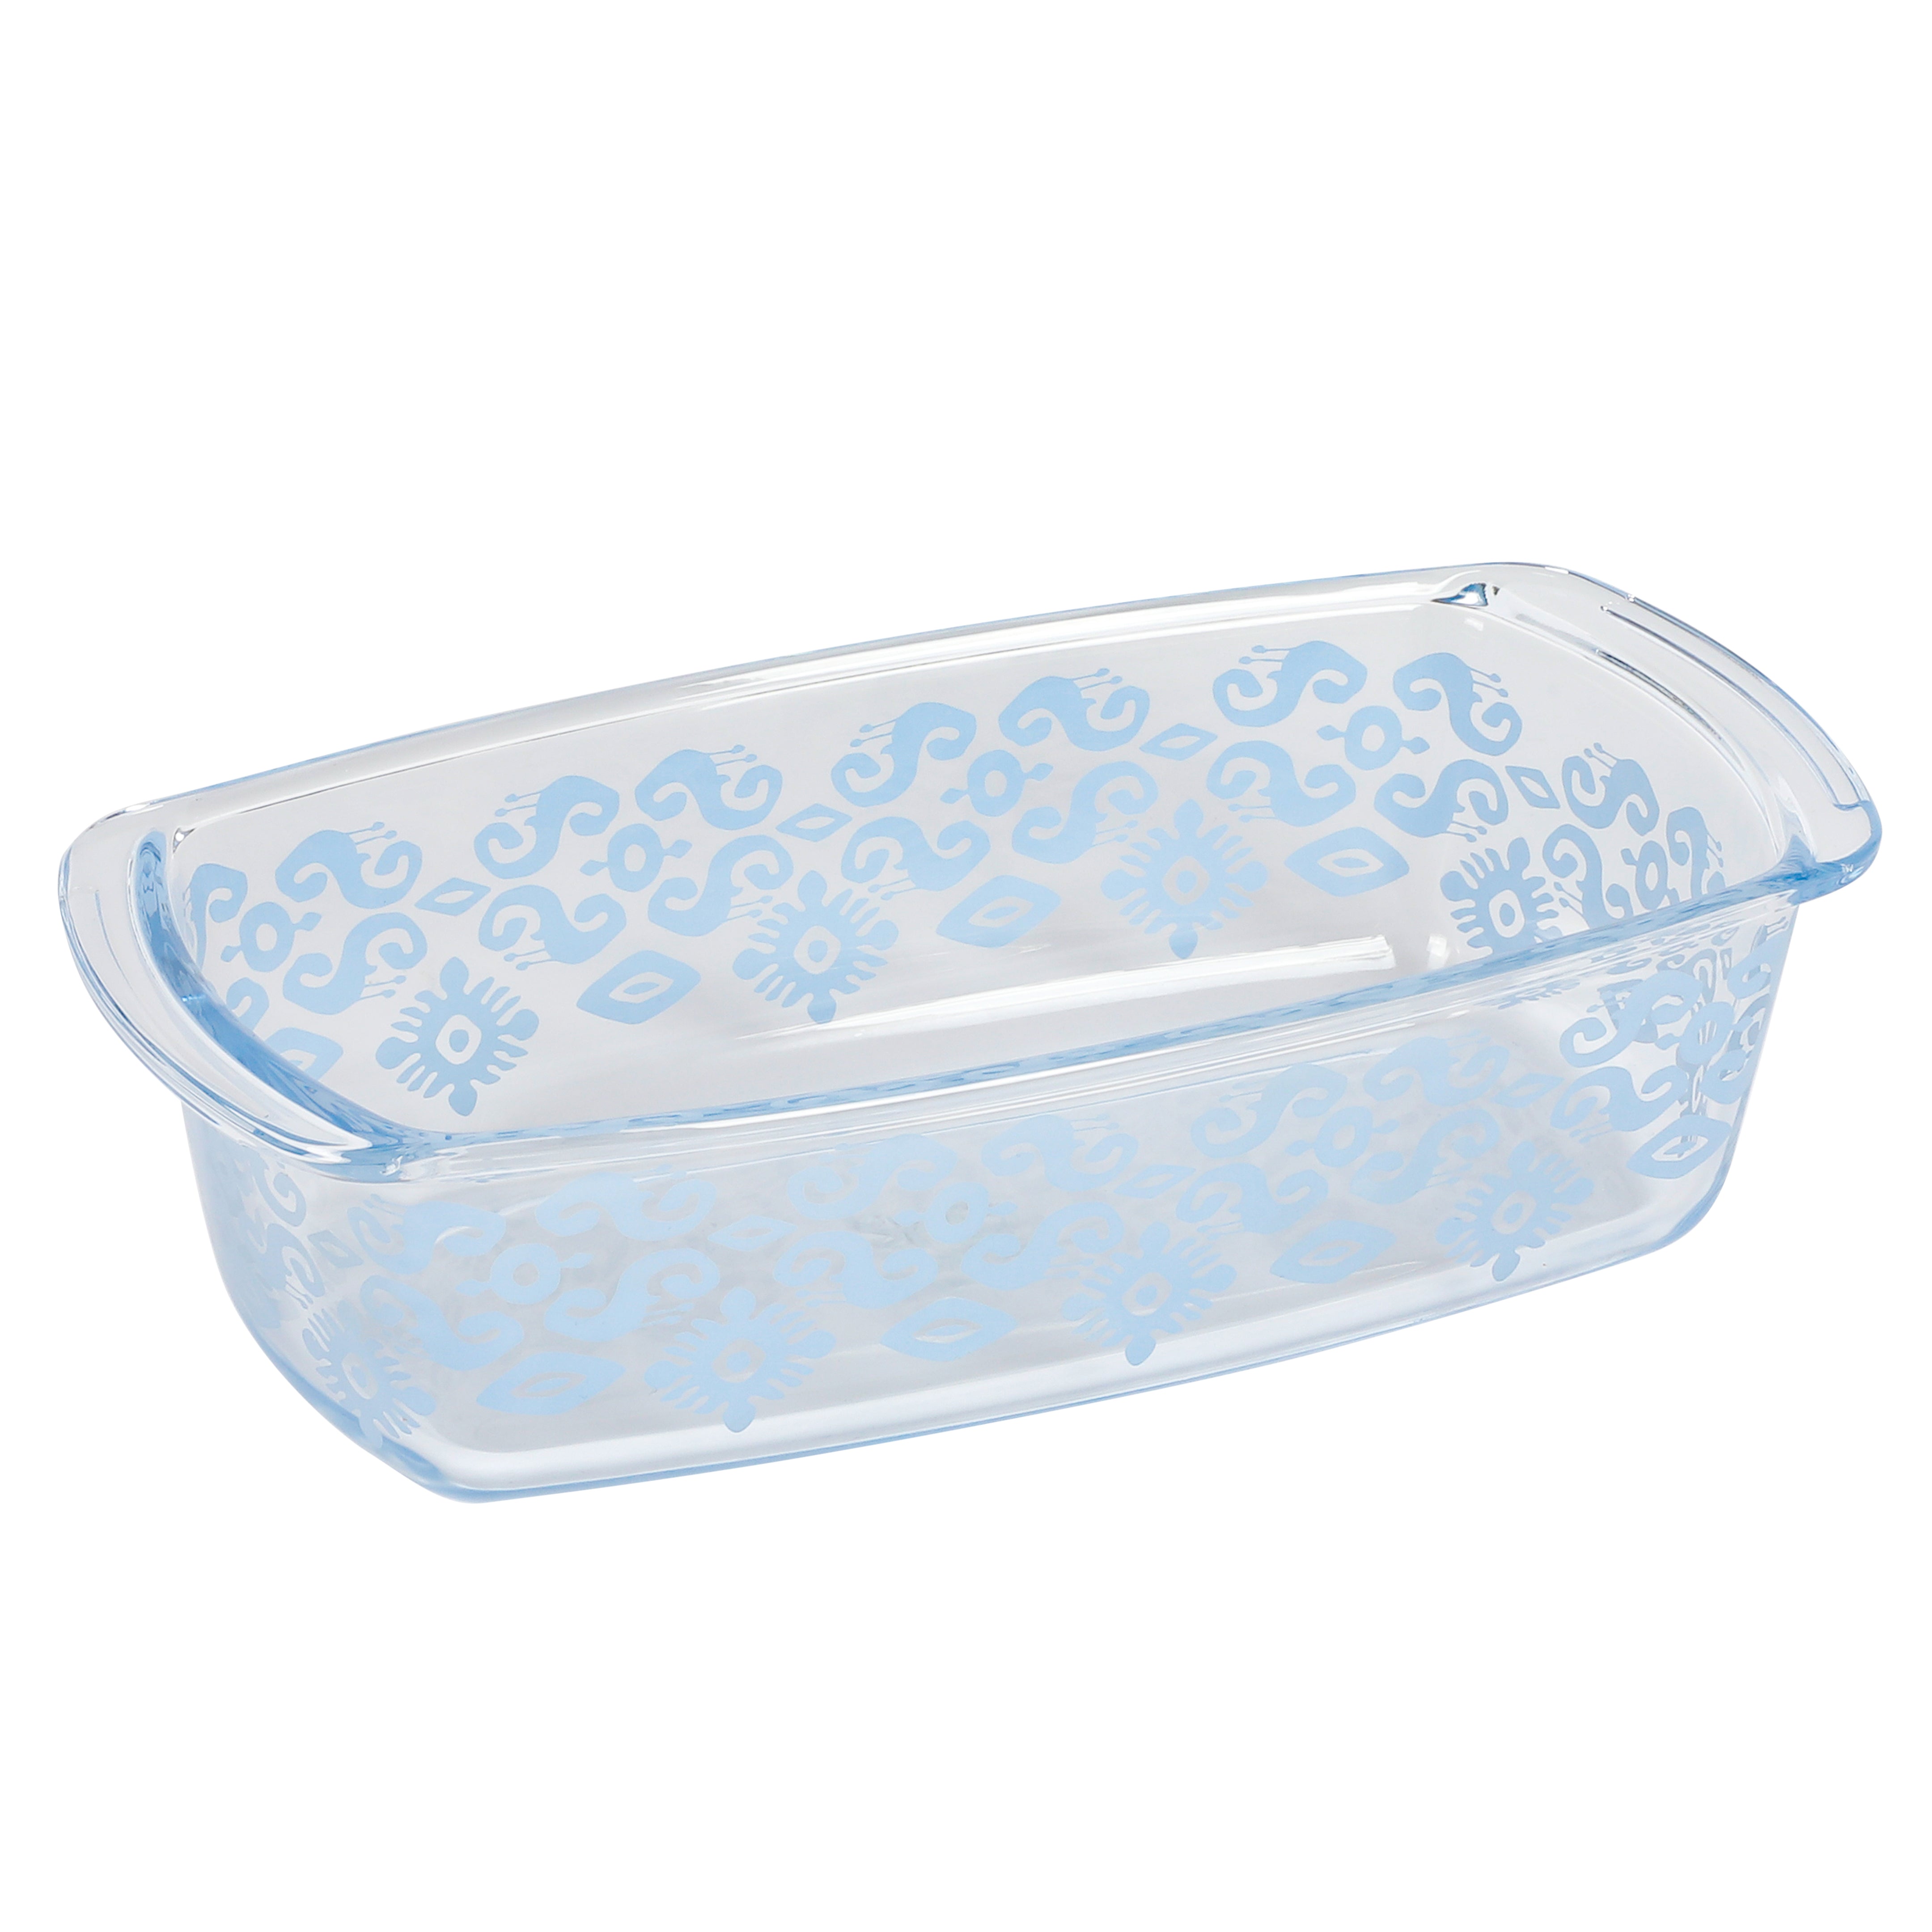 Spice by Tia Mowry Spicy Cloves 1.6-Quart Loaf Pan Oven, Dishwasher and Microwave Safe Borosilicate Glass Bakeware